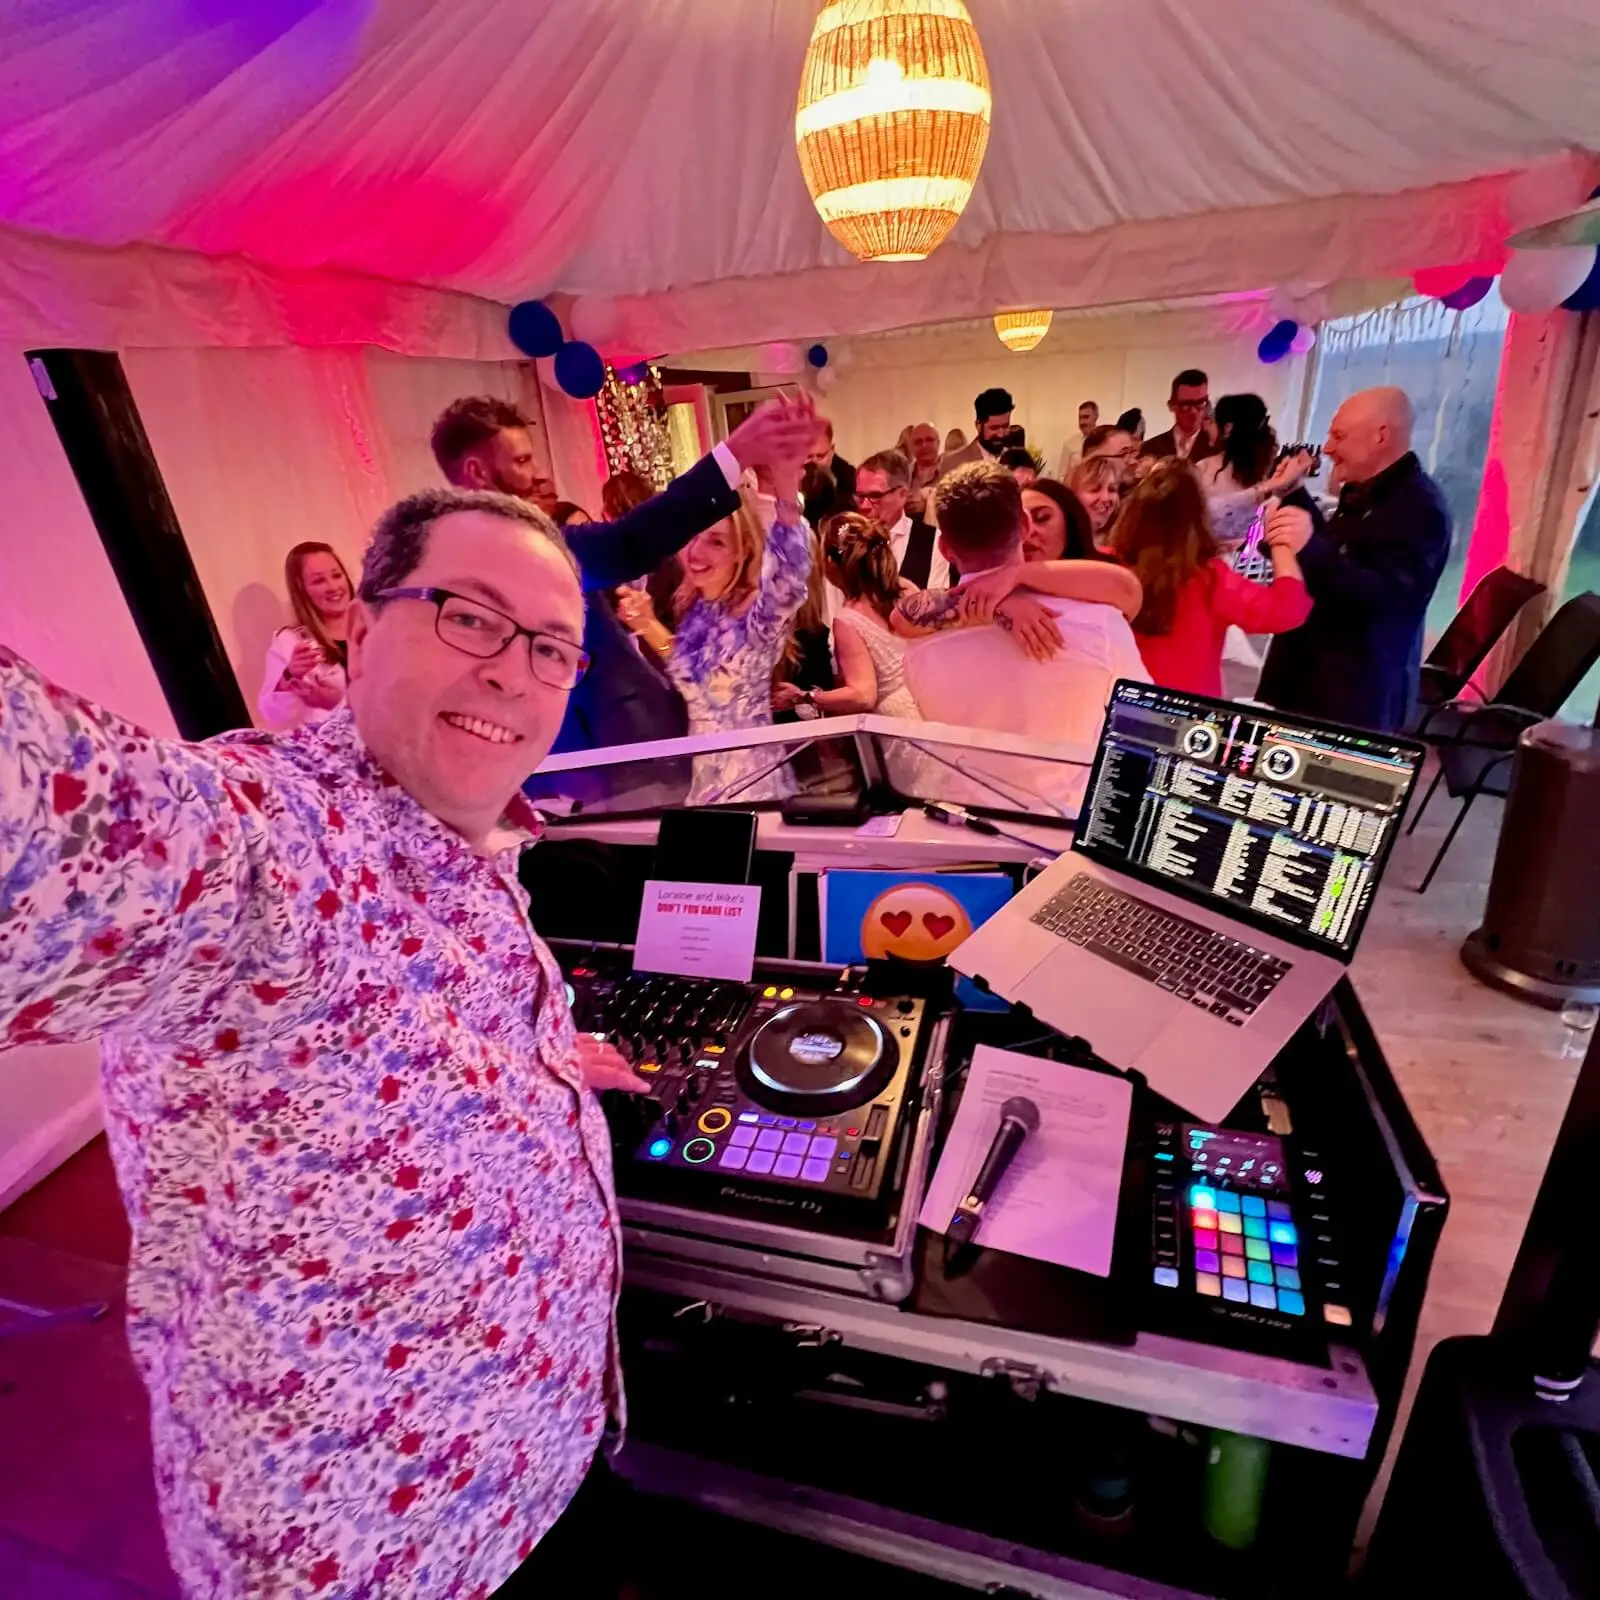 How to Find a Wedding DJ